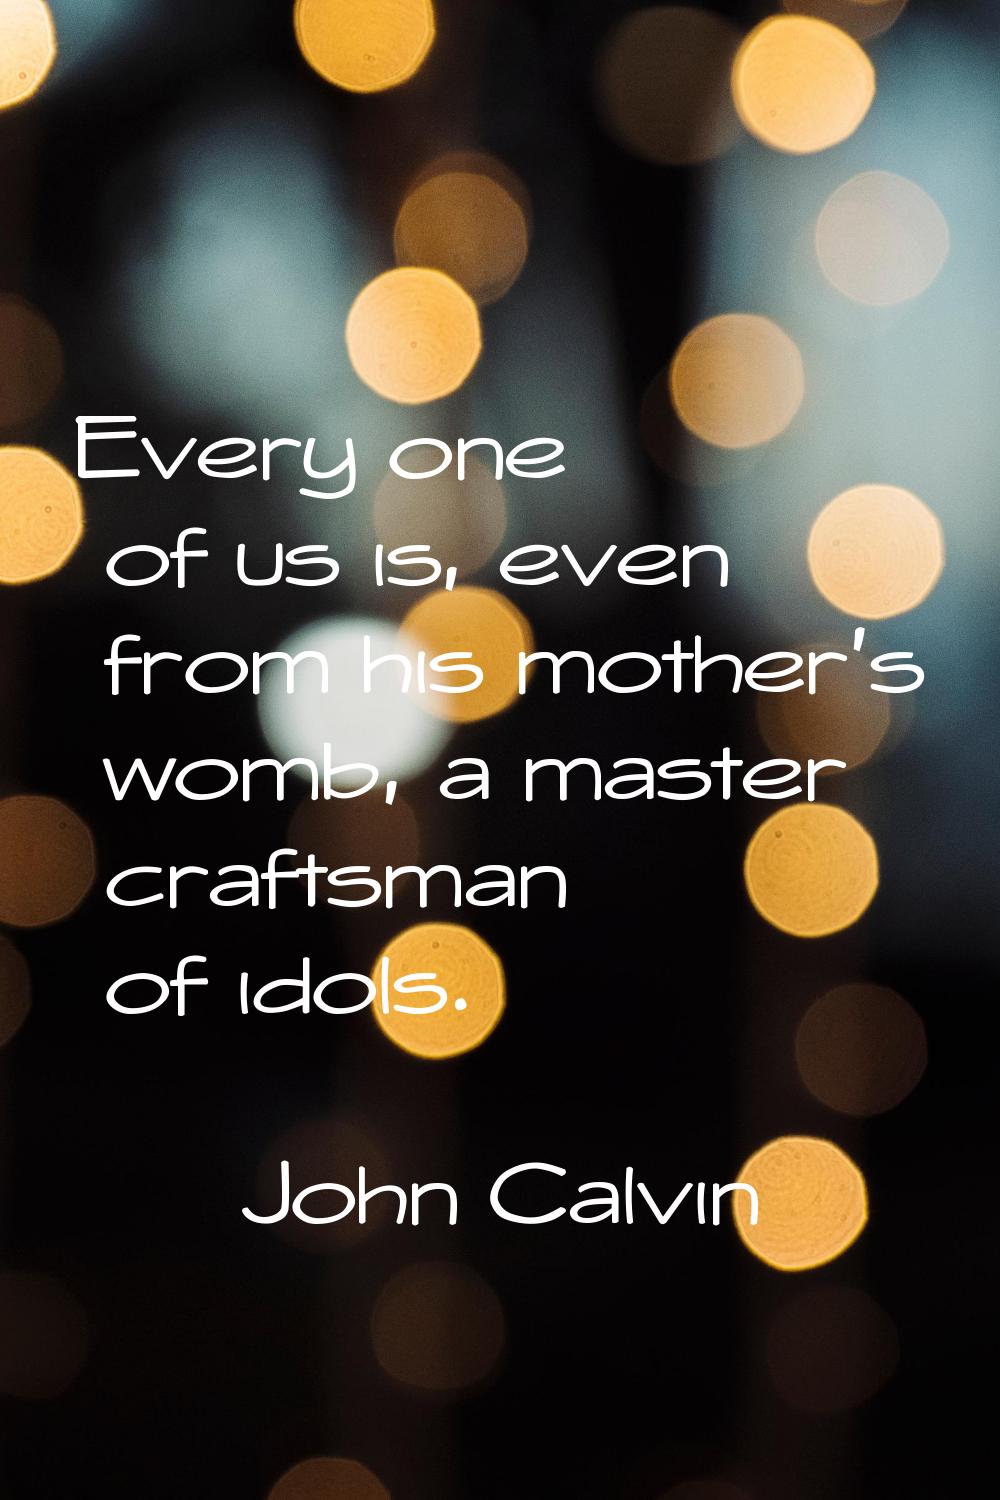 Every one of us is, even from his mother's womb, a master craftsman of idols.